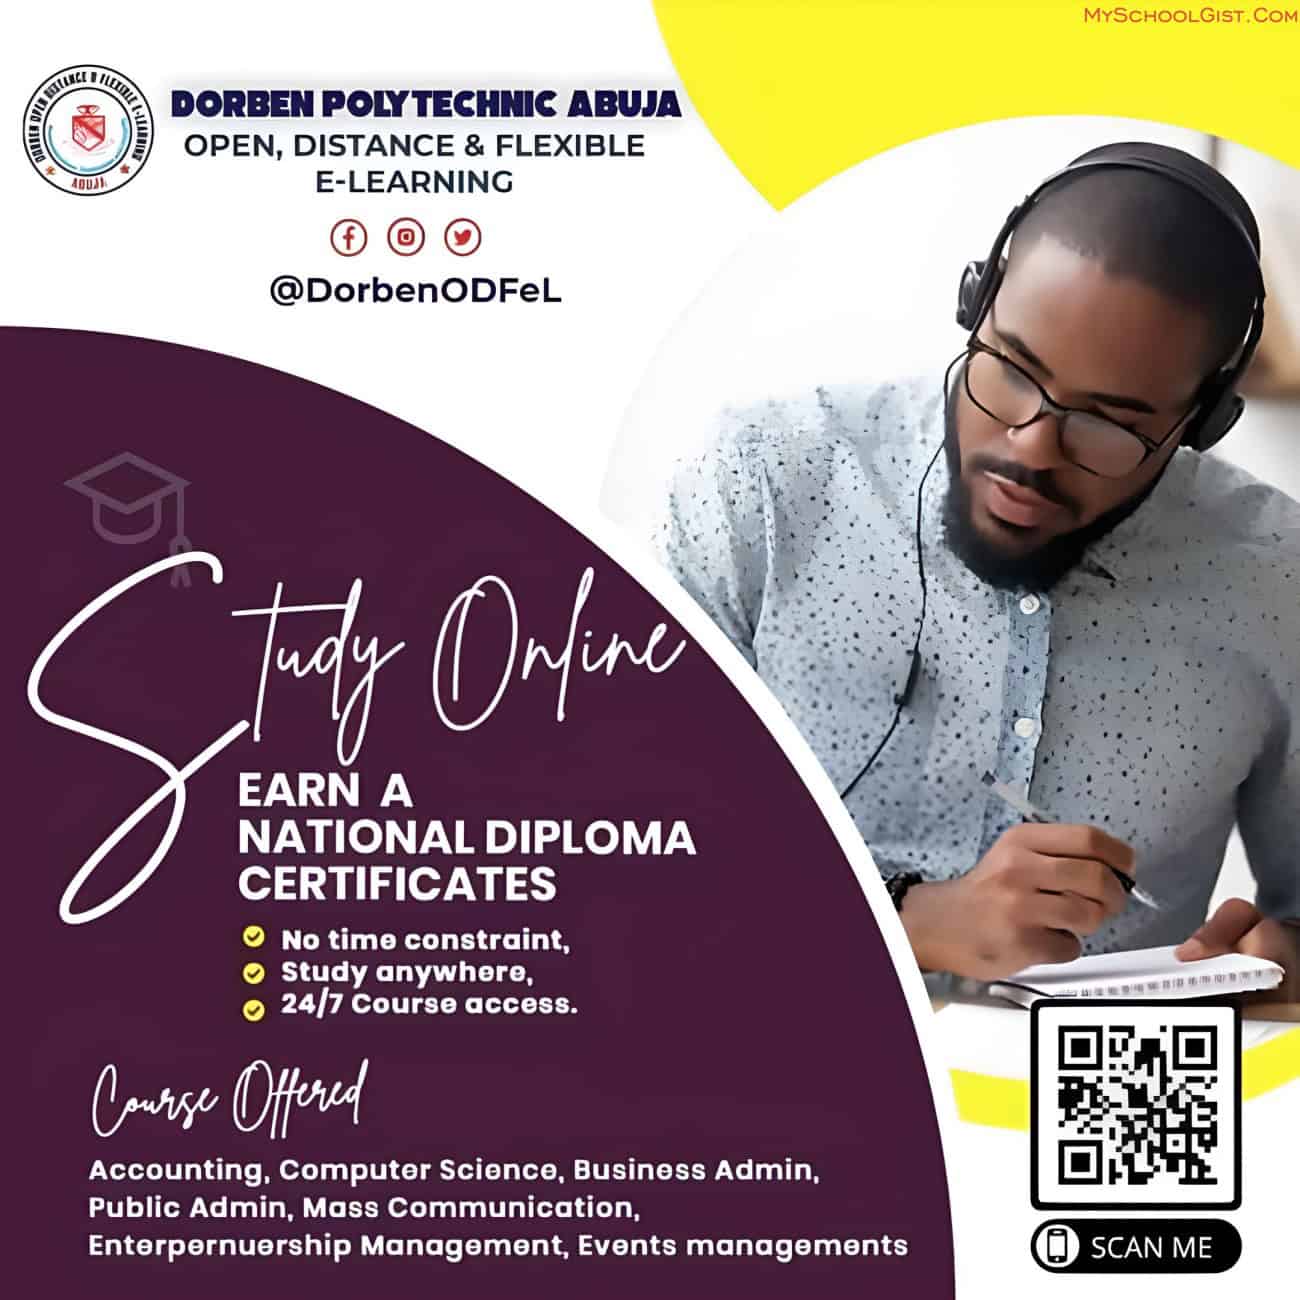 Dorben Polytechnic, Abuja Open, Distance, and Flexible e-Learning (ODFeL)